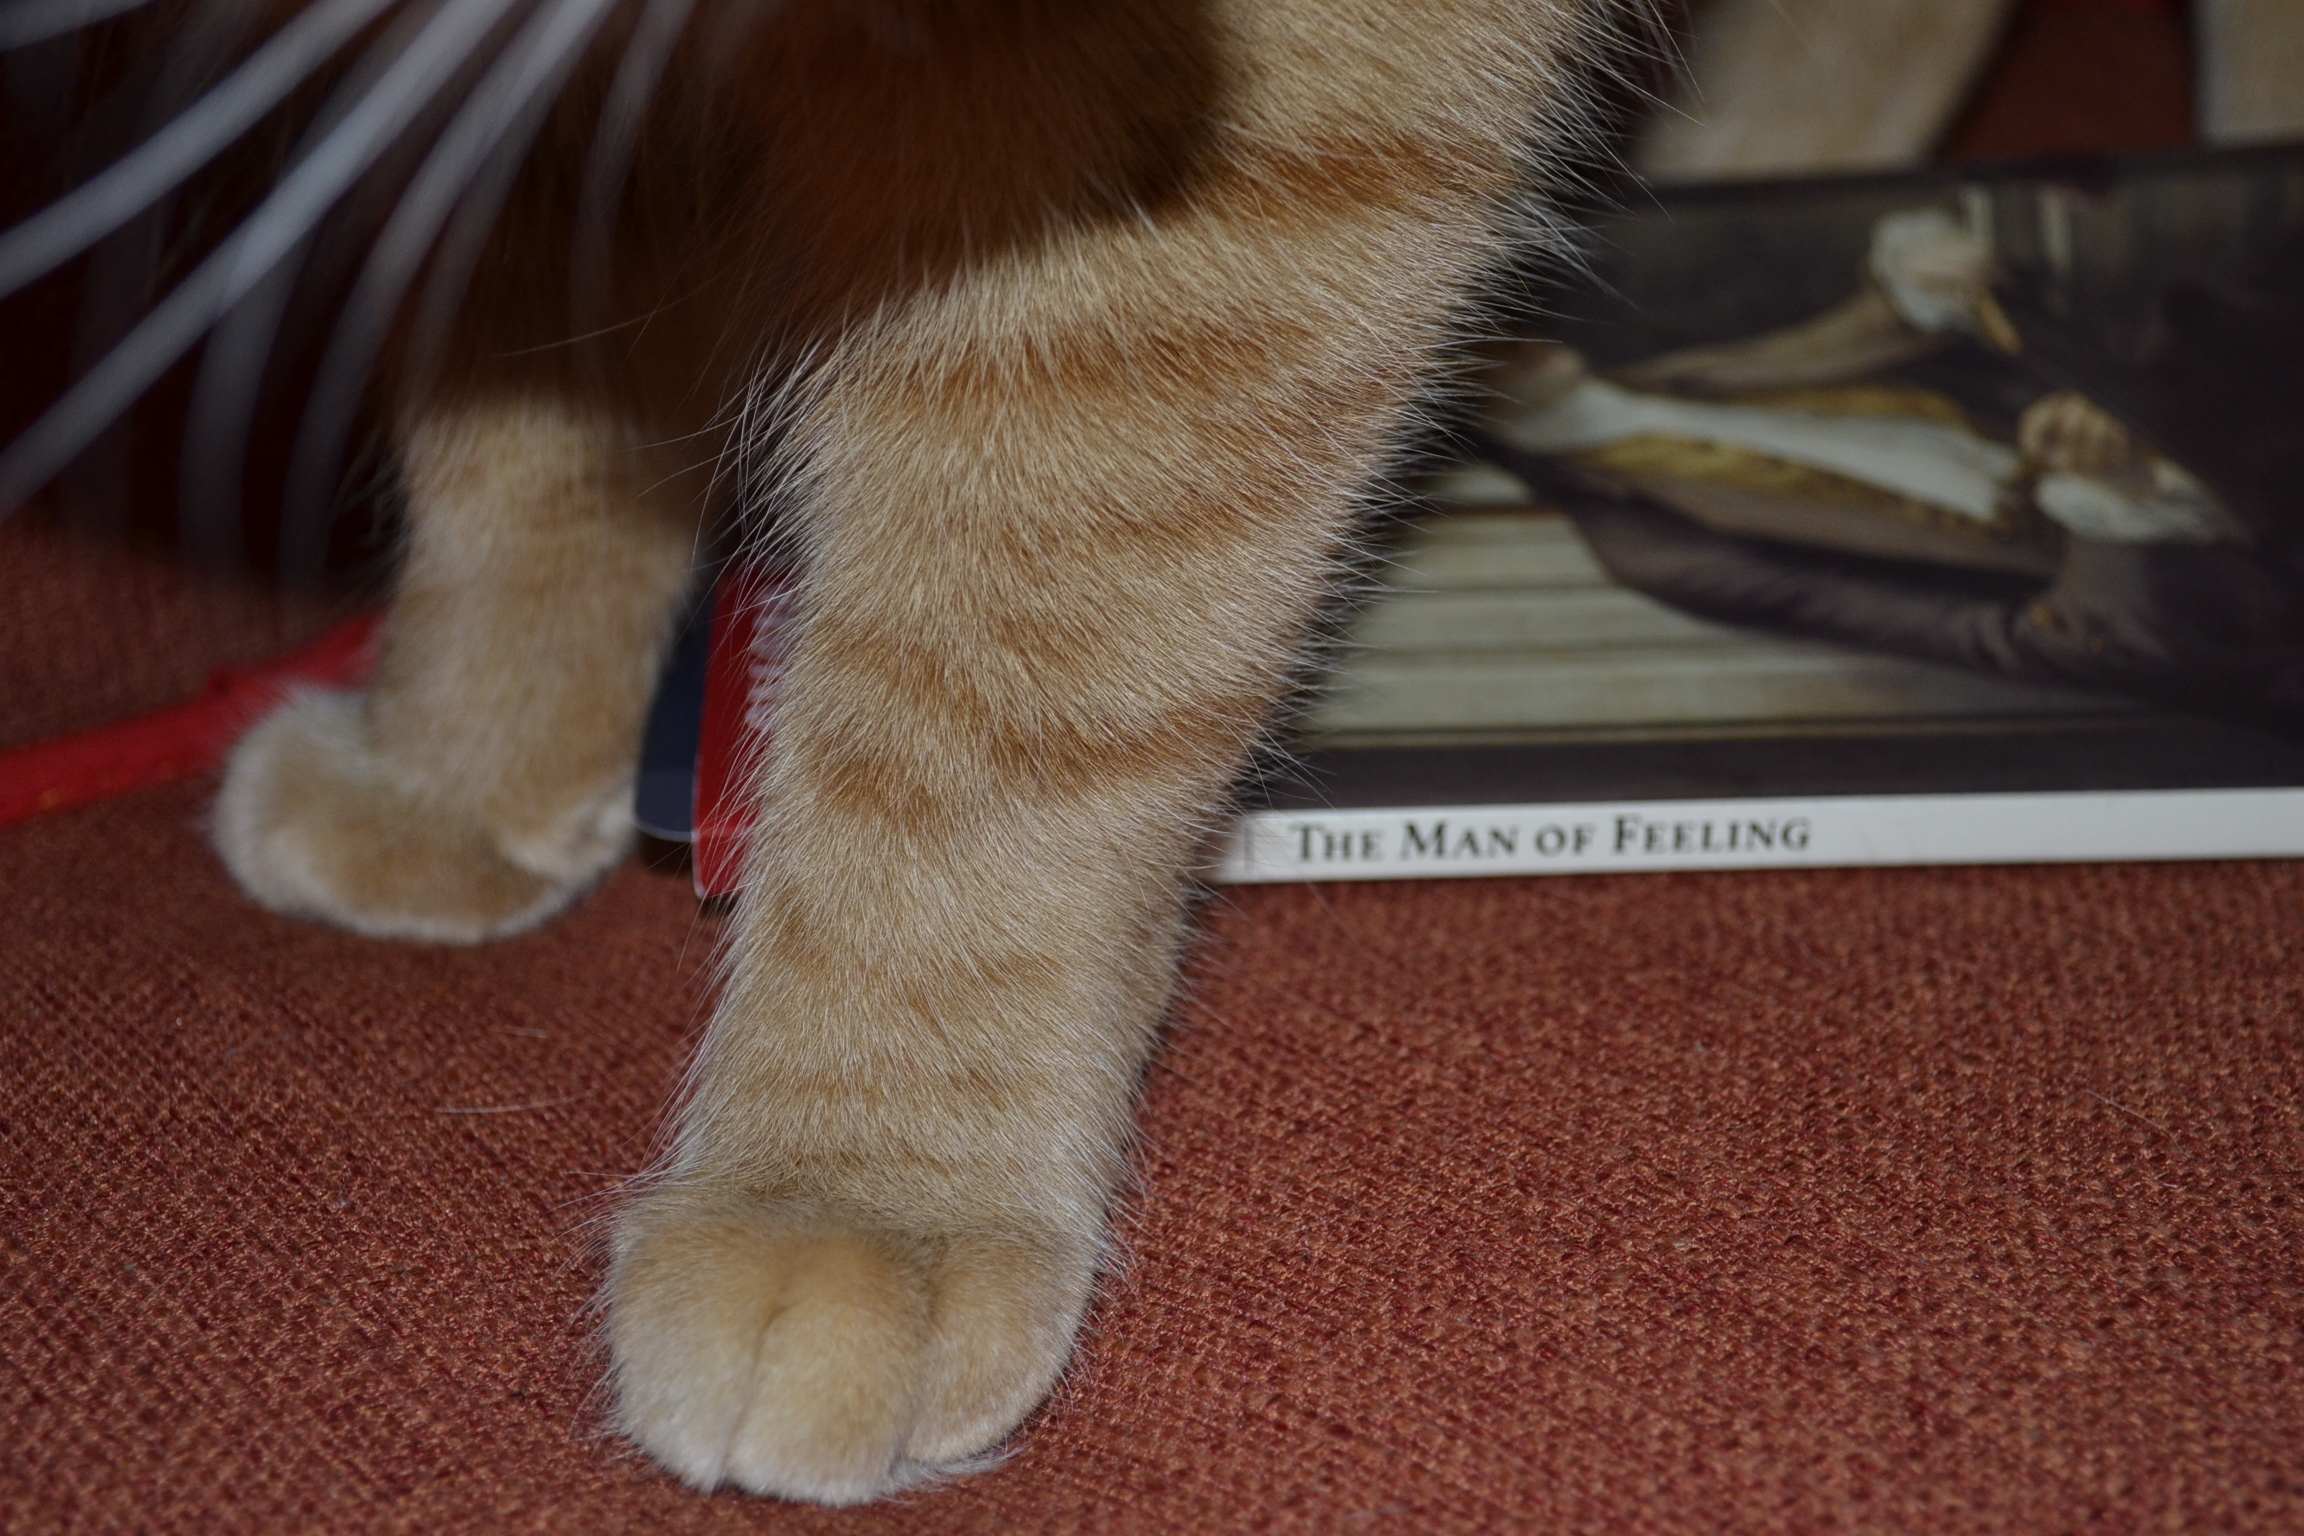 Orange tabby paws occlude the spine of The Man of Feeling.